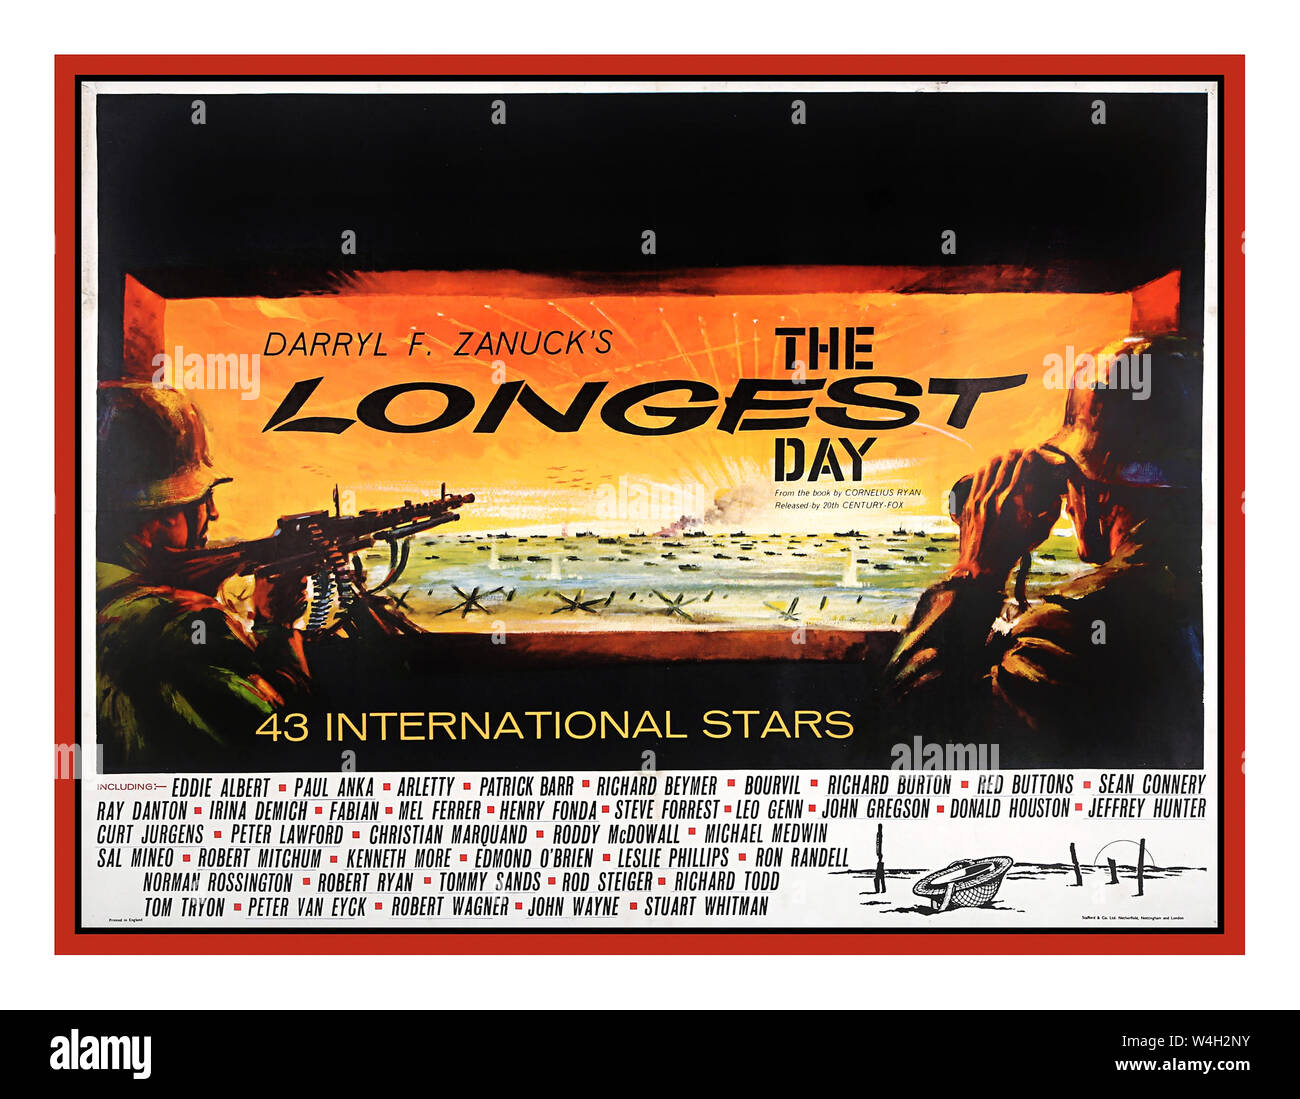 Vintage UK movie cinema film poster for 'The Longest Day' (1962). A huge star-studded cast for the film about D-Day invasion including John Wayne, Richard Burton and Sean Connery. The Longest Day is a 1962 epic war film based on Cornelius Ryan's 1959 book The Longest Day (1959) about the D-Day landings at Normandy on June 6, 1944, during World War II. The film was produced by Darryl F. Zanuck, The screenplay was by Ryan, with additional material written by Romain Gary, James Jones, David Pursall, and Jack Seddon. It was directed by Ken Annakin Stock Photo